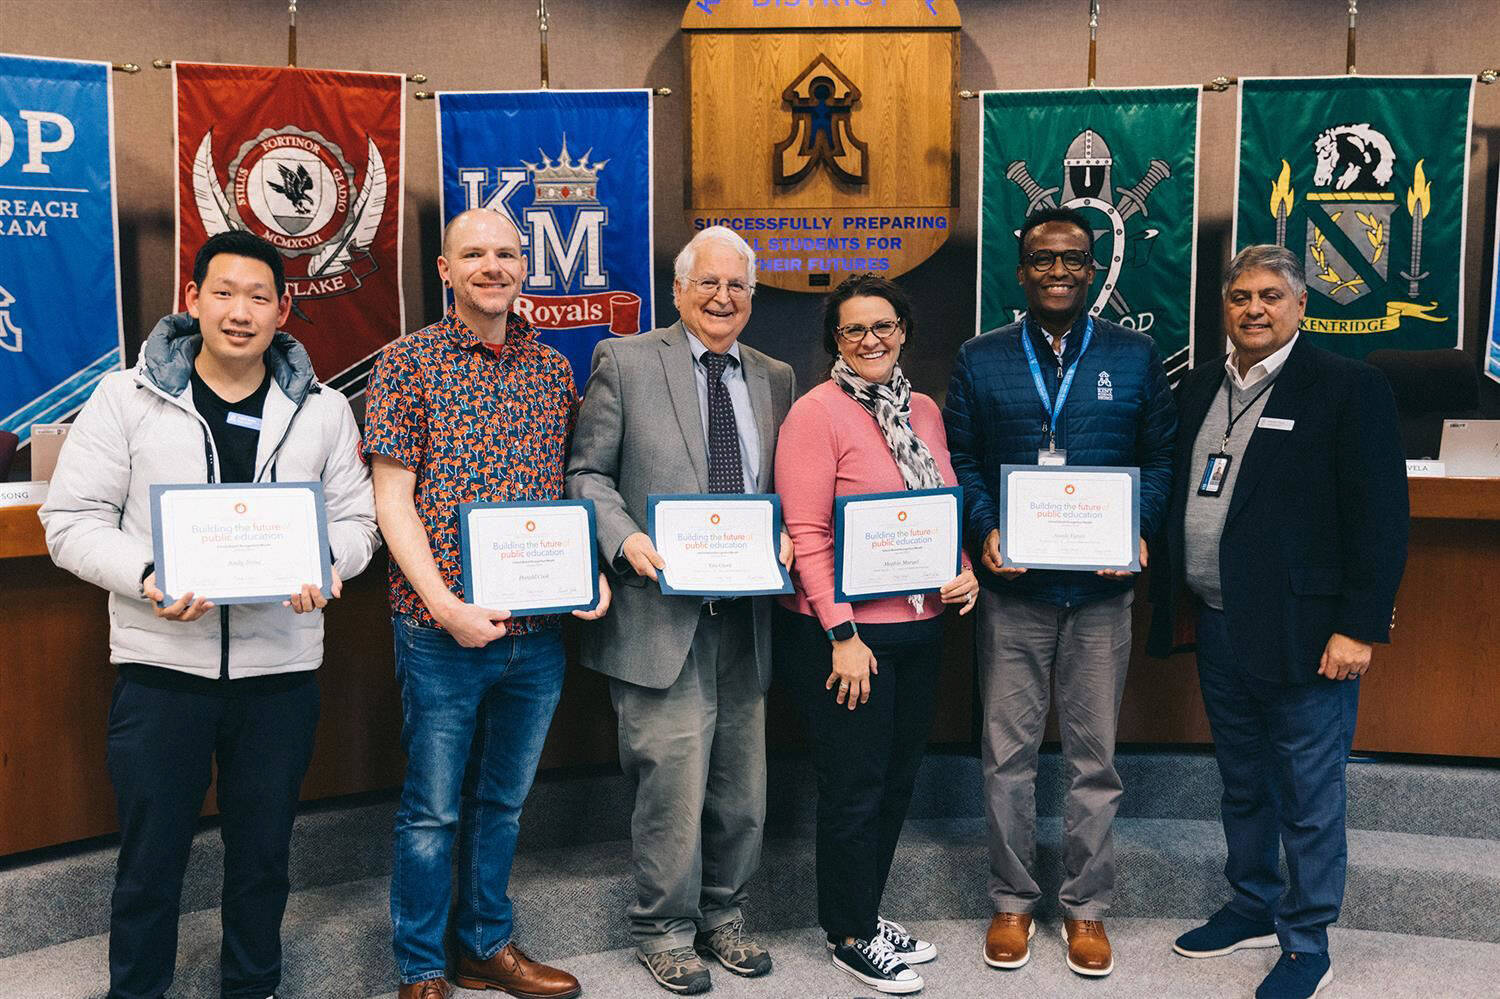 Kent School Board members, from left to right, Andy Song, Donald Cook, Tim Clark, Meghin Margel and Awale Farah with Superintendent Israel Vela. COURTESY PHOTO, Kent School District